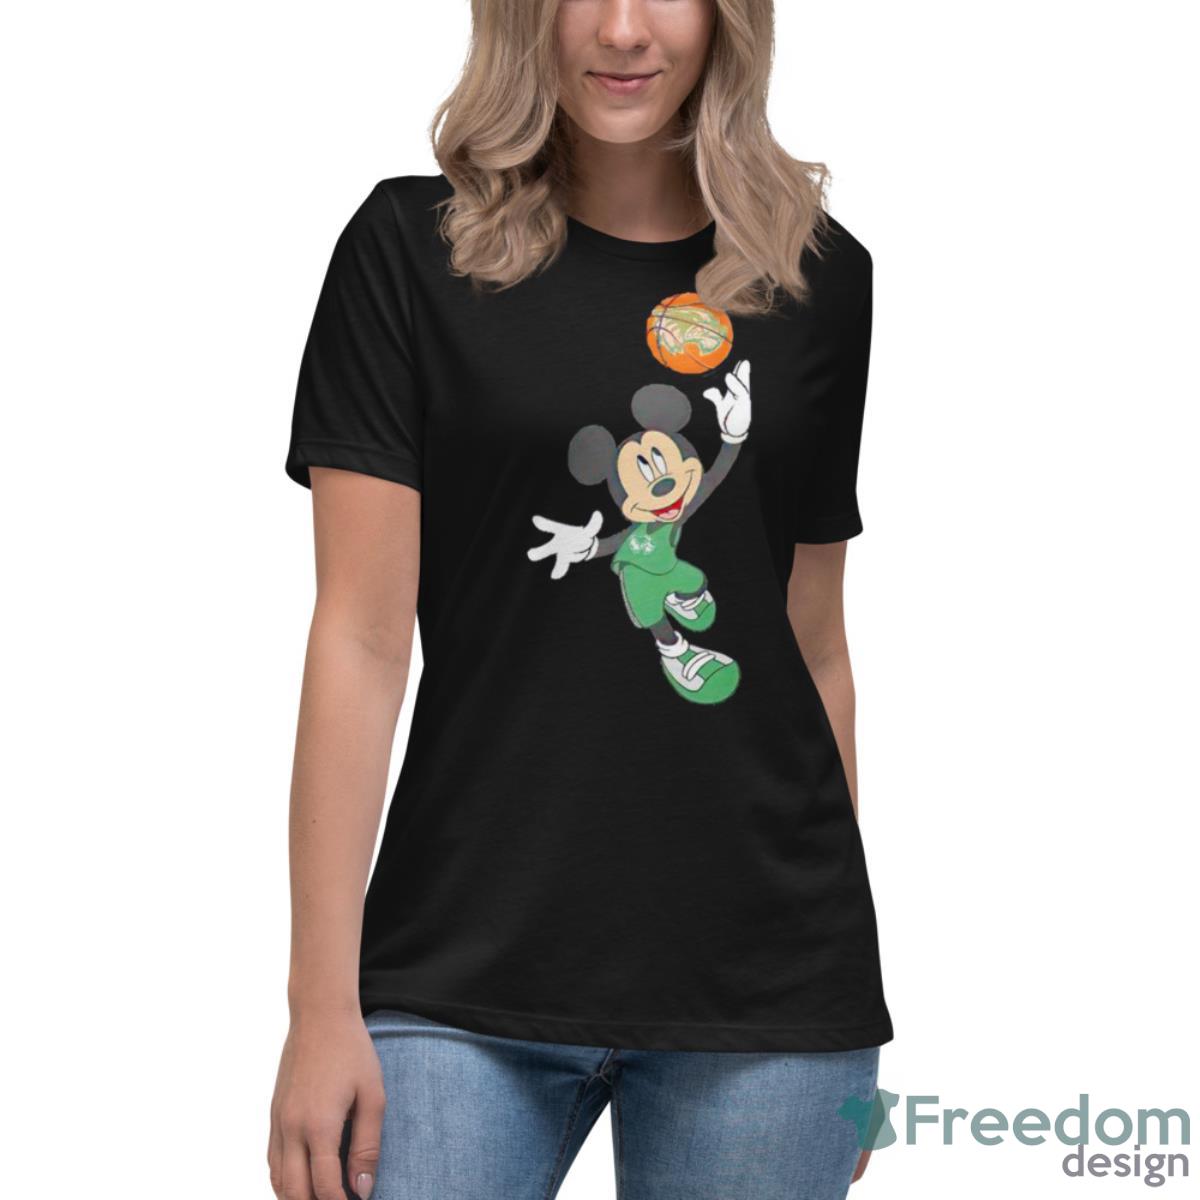 Utah Valley Wolverines Mickey March Madness Shirt